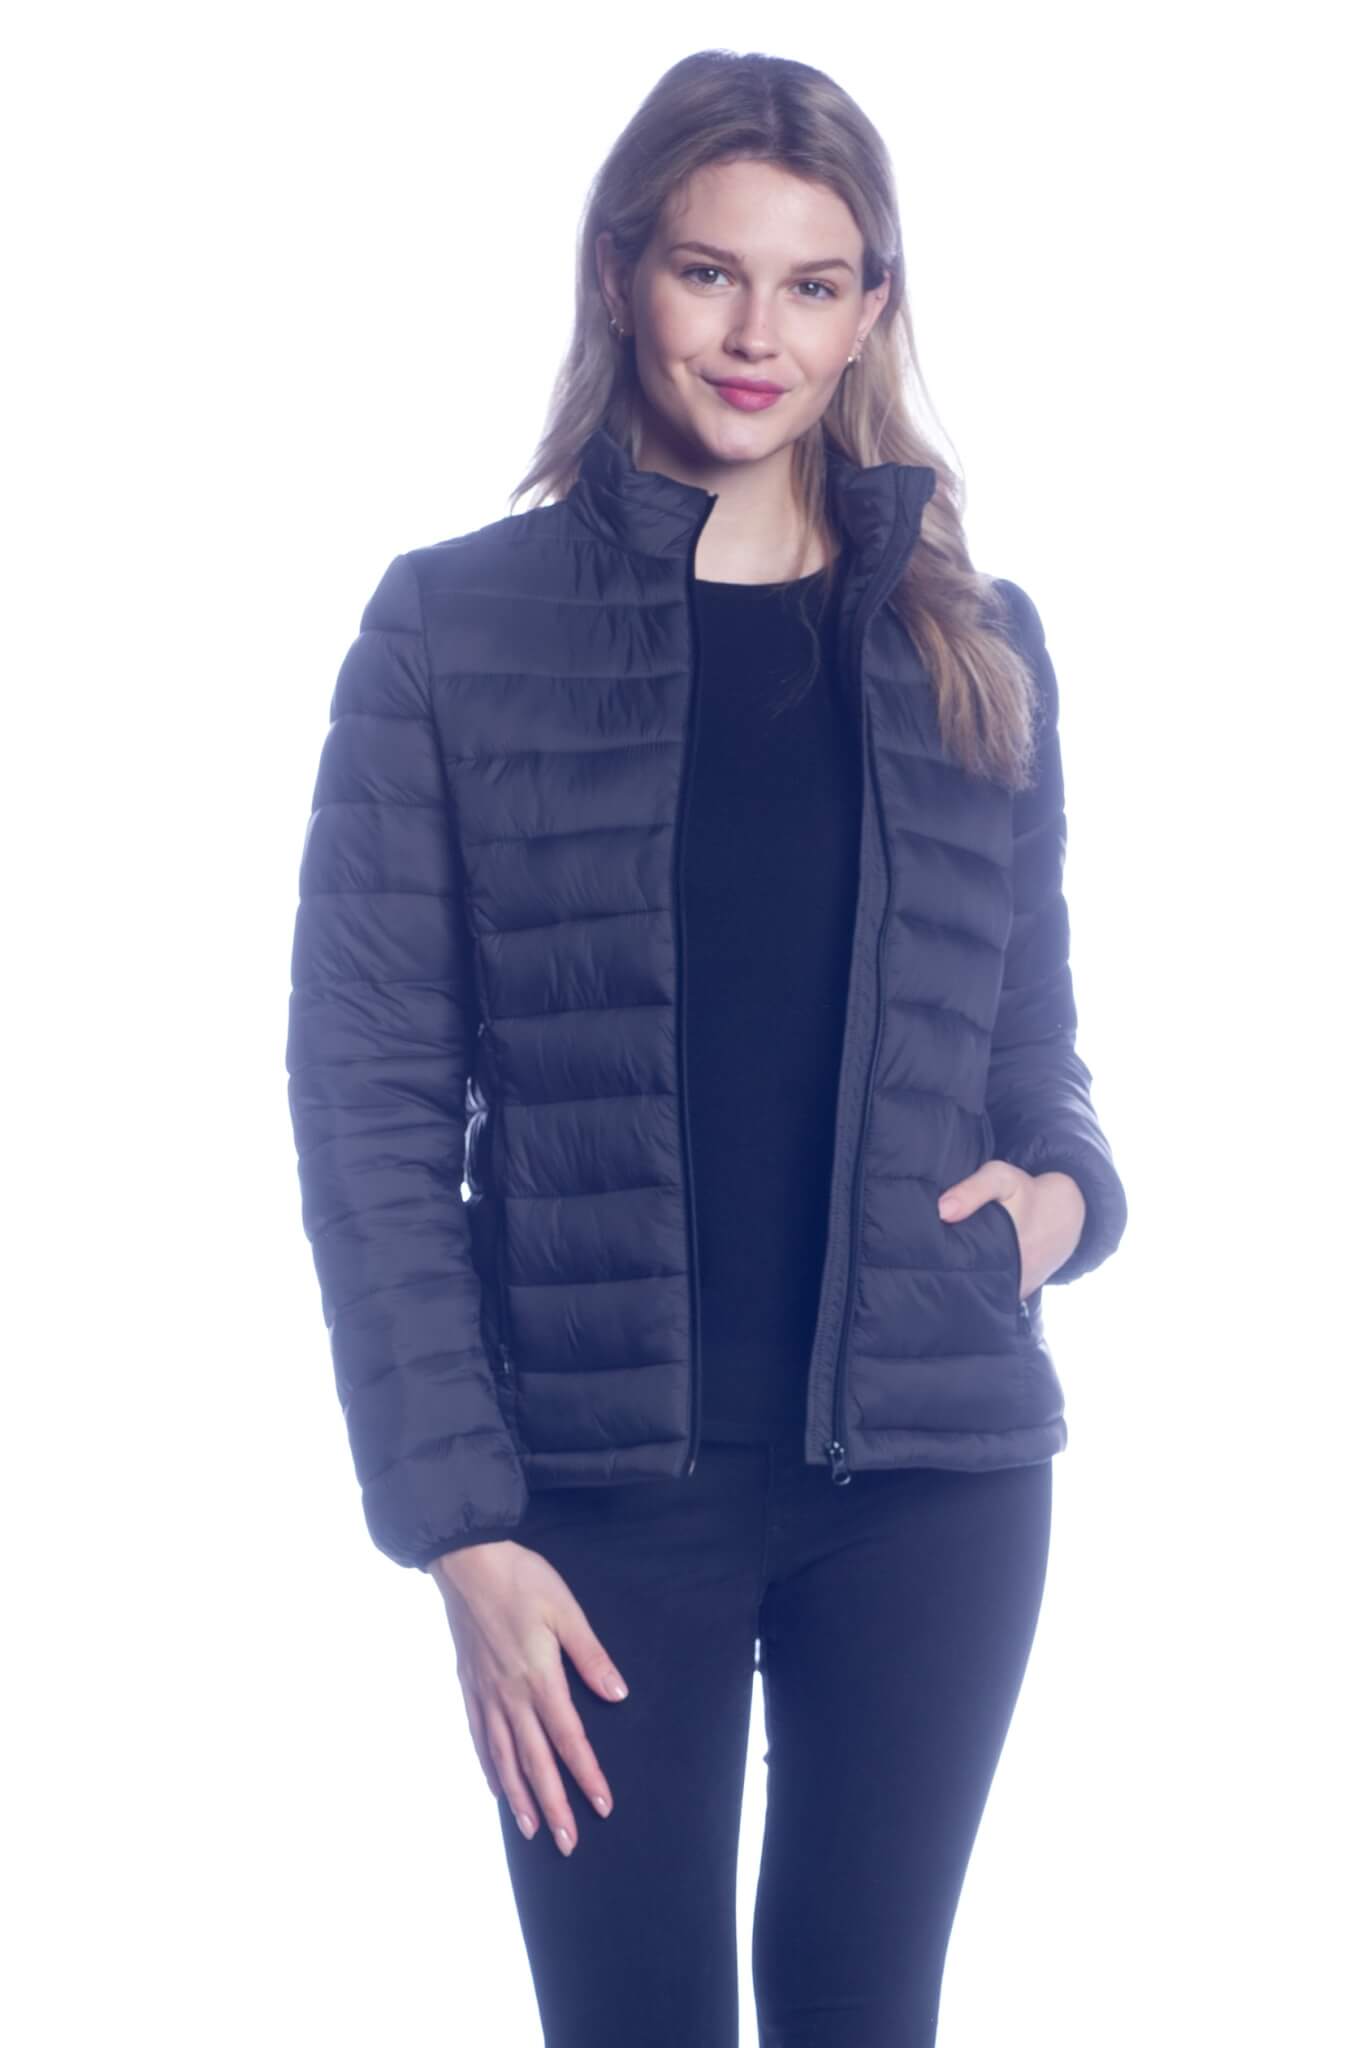 Padded Jacket with Zipper Pockets - DKR & Company Apparel / Clothes Out ...